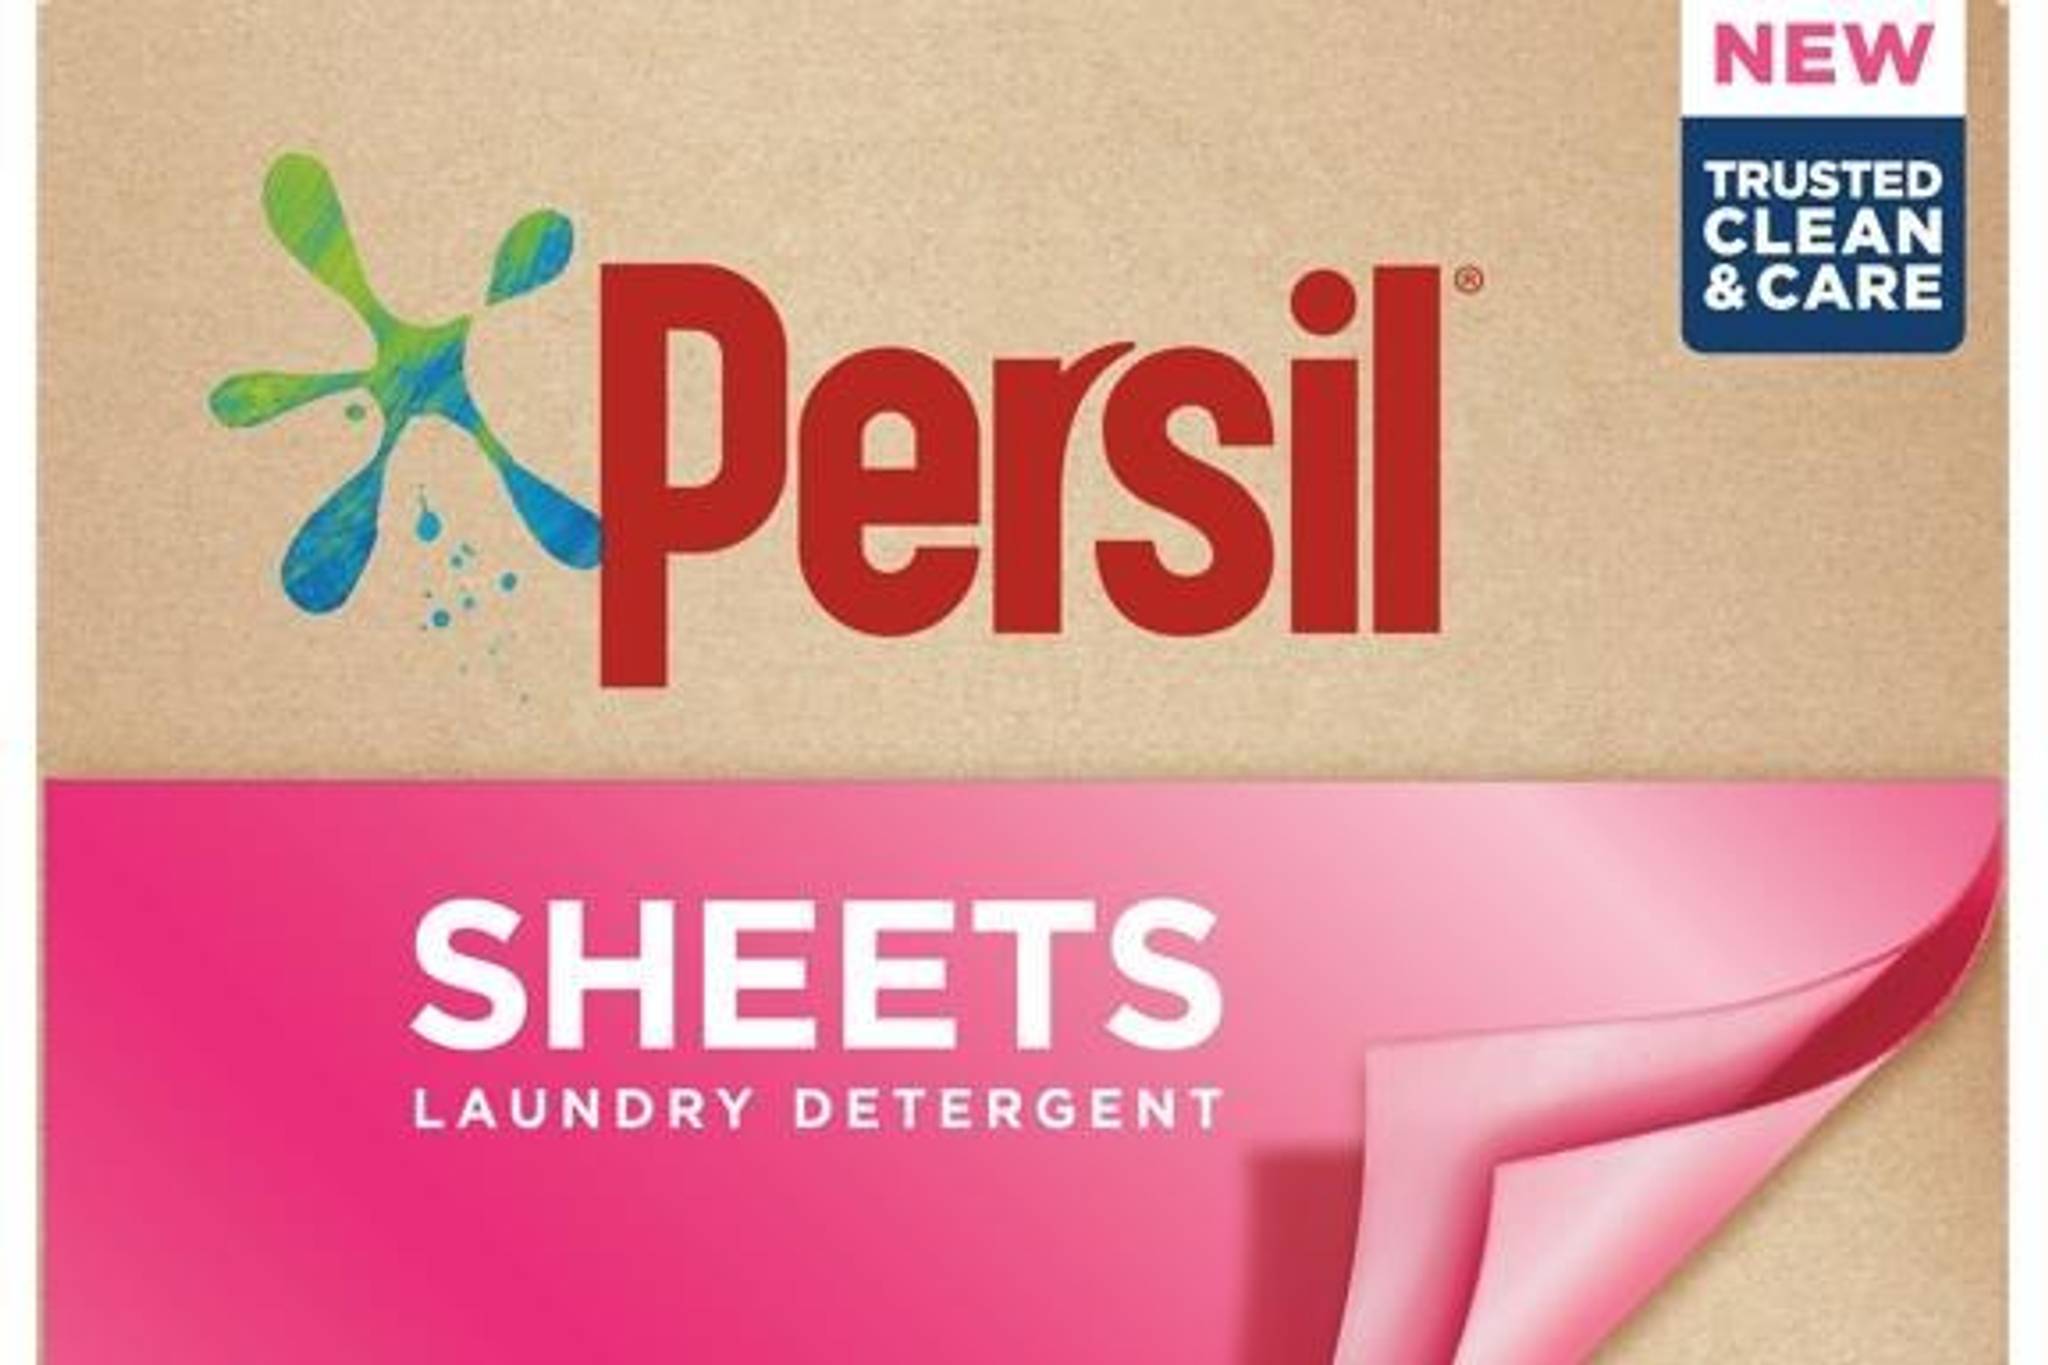 Persil provides eco-convenience with new laundry sheets